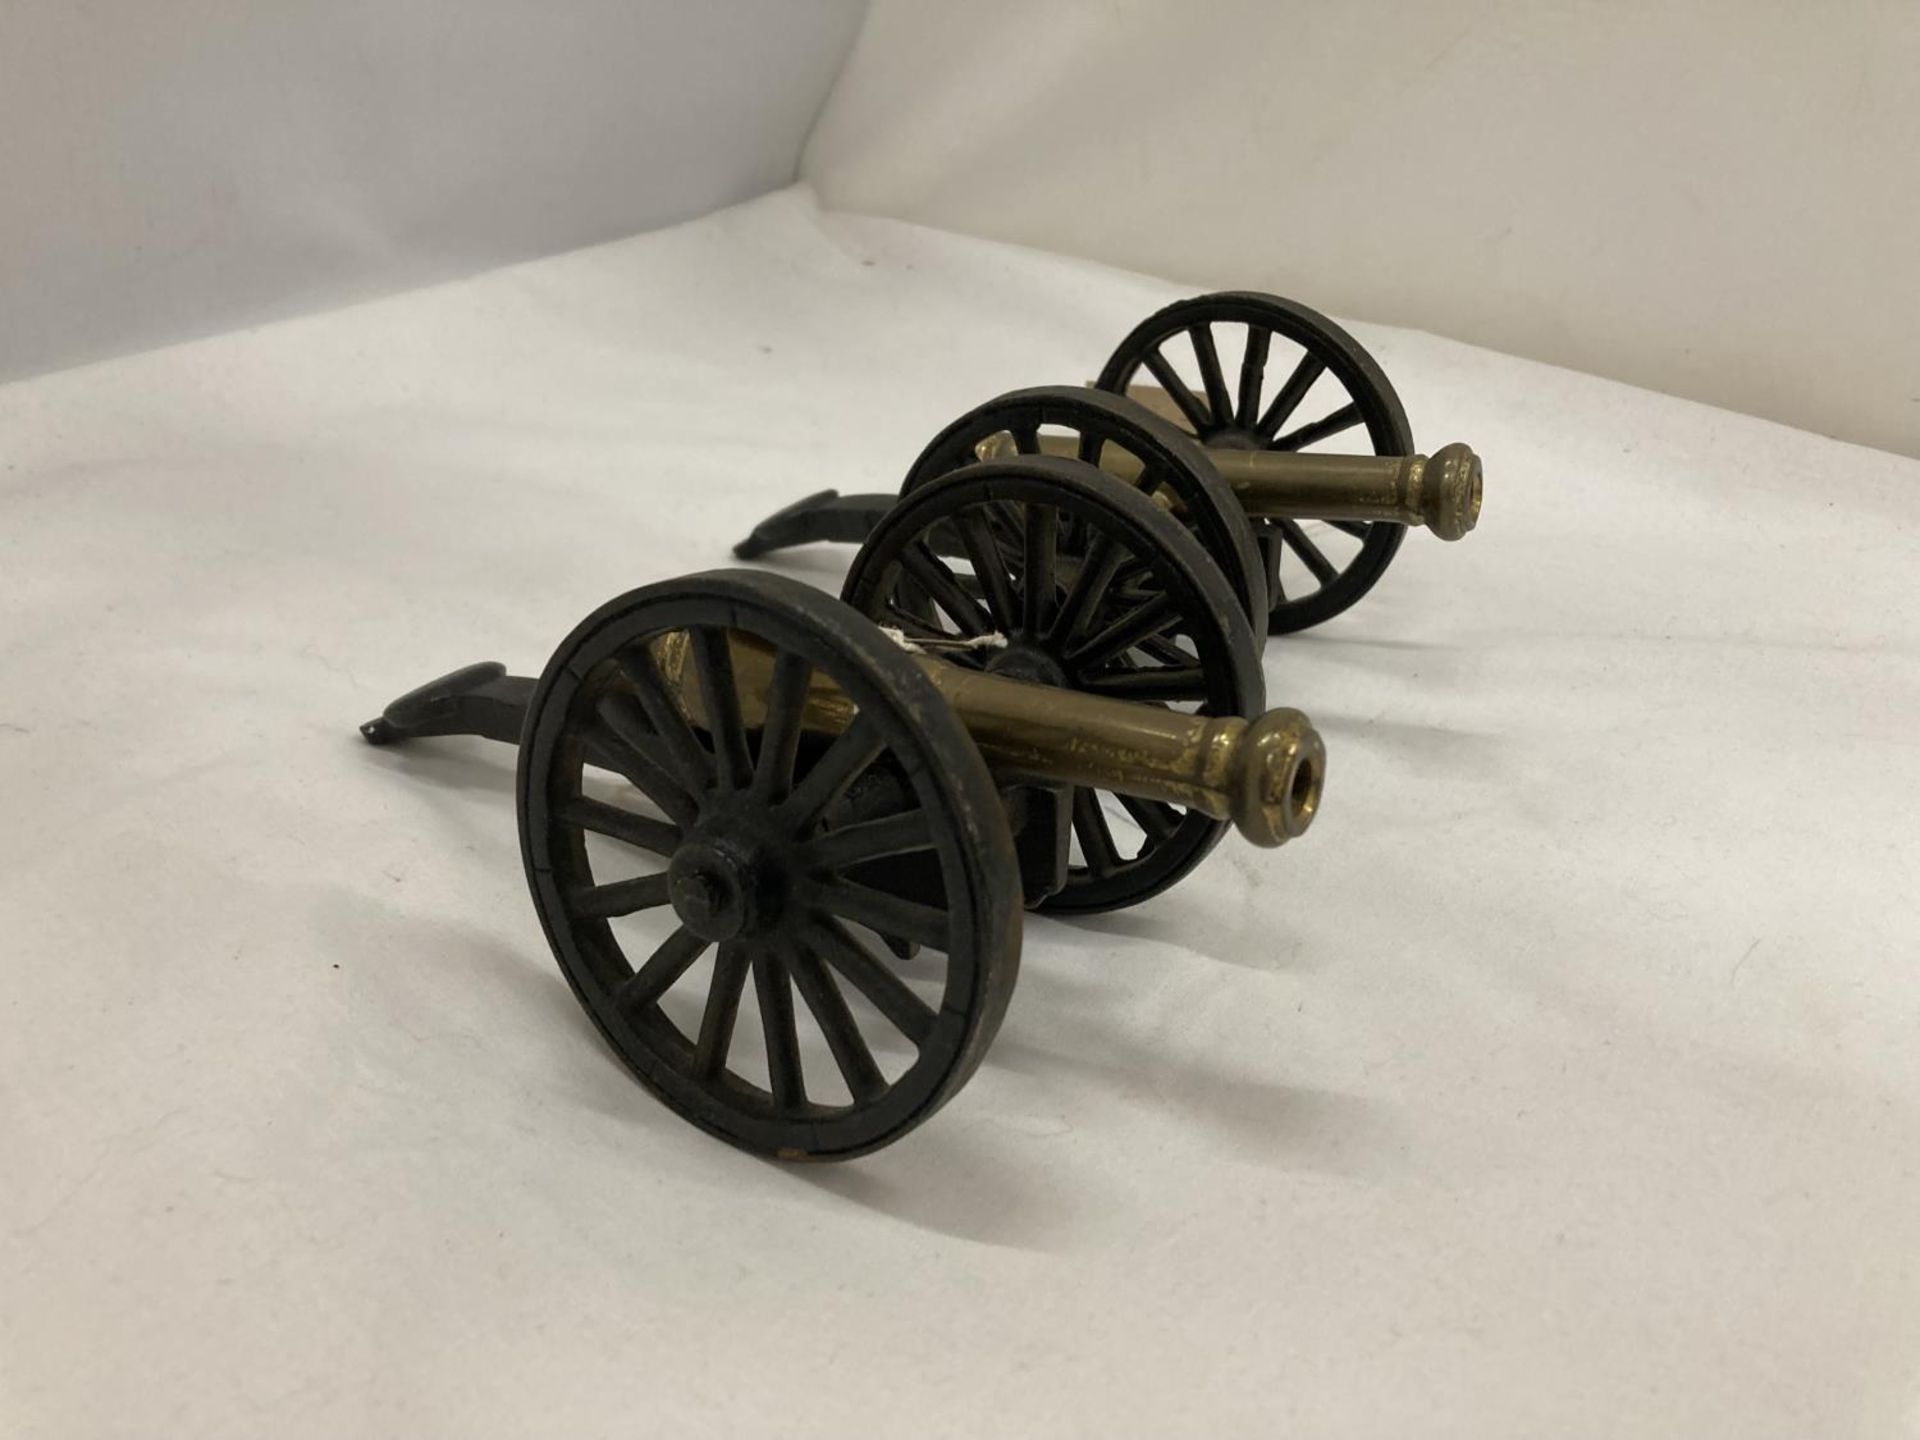 A PAIR OF NON FIRING MODEL NAPOLEONIC WAR CANNONS, 12.5CM BARRELS, LENGTH 19CM - Image 3 of 3